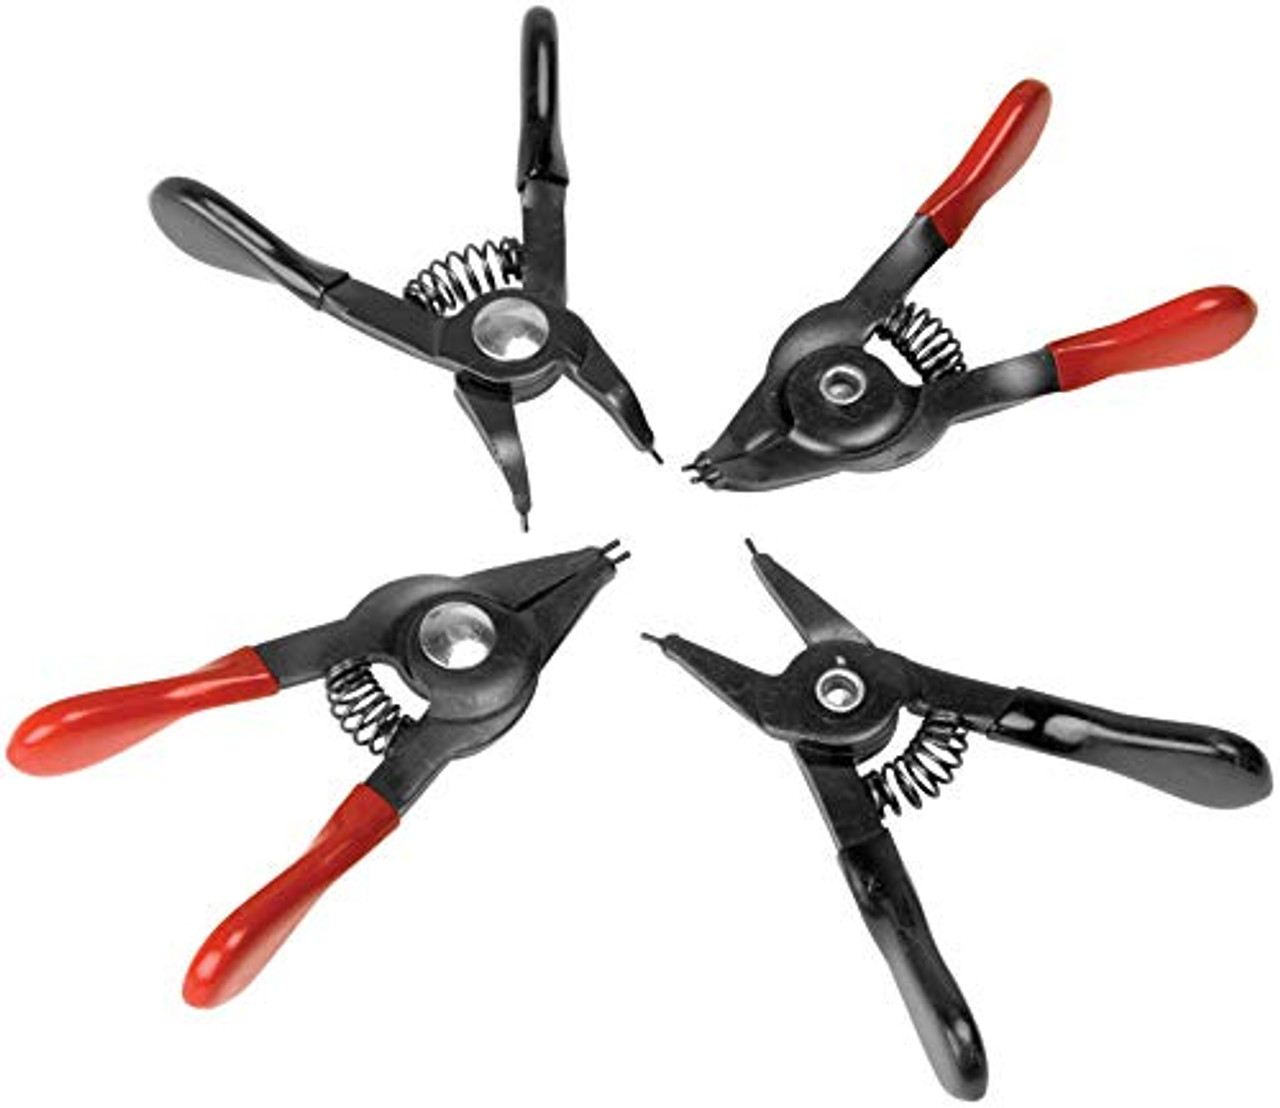 Performance Tool W88015 16 in. Snap Ring Plier Set